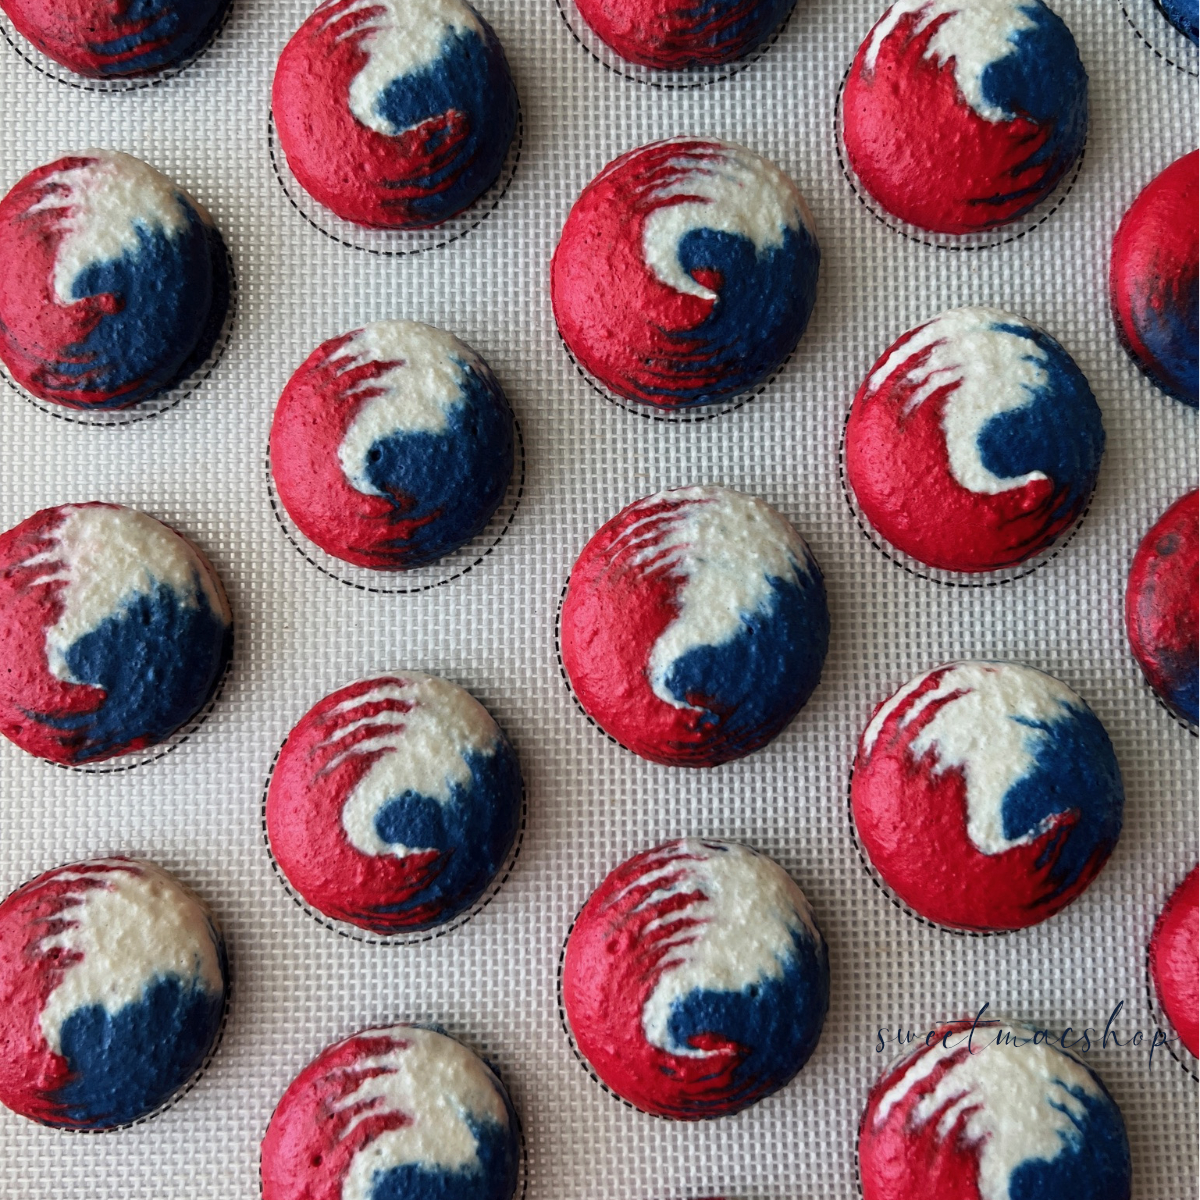 Red White and Blue Macarons: The Best 4th of July Treats